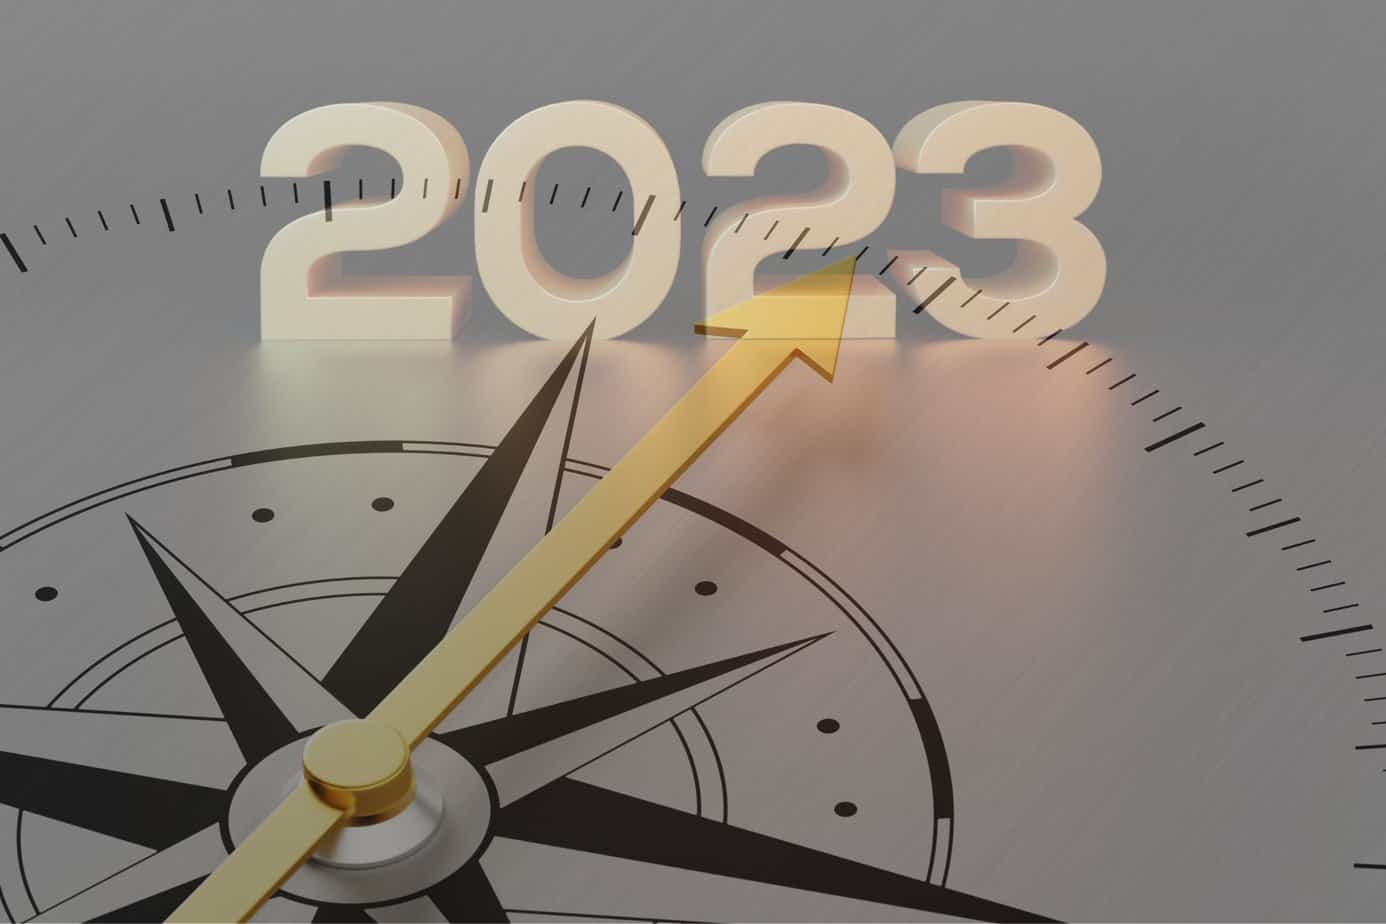 Astounding prophecies for 2023, which has been described as ‘a revolutionary year’